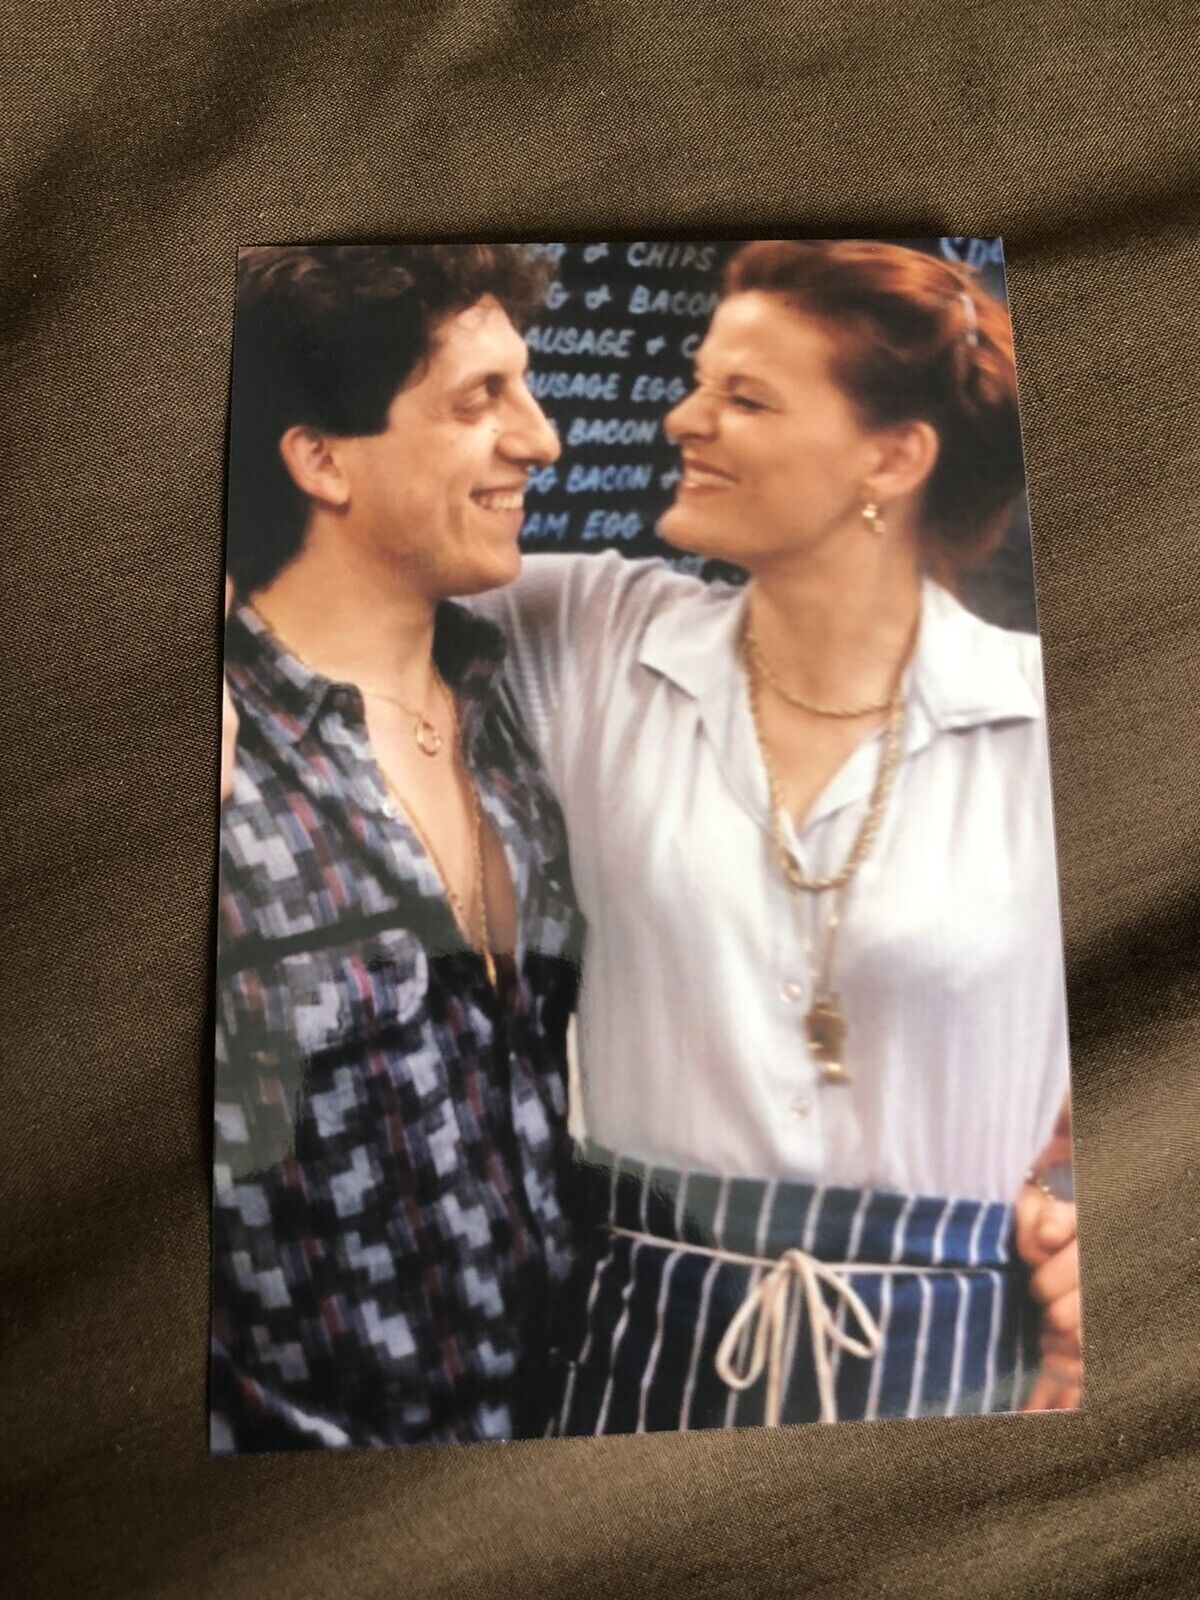 SANDY RATCLIFFE & NEJDET SALIH (EASTENDERS) UNSIGNED Photo Poster painting- 6x4”